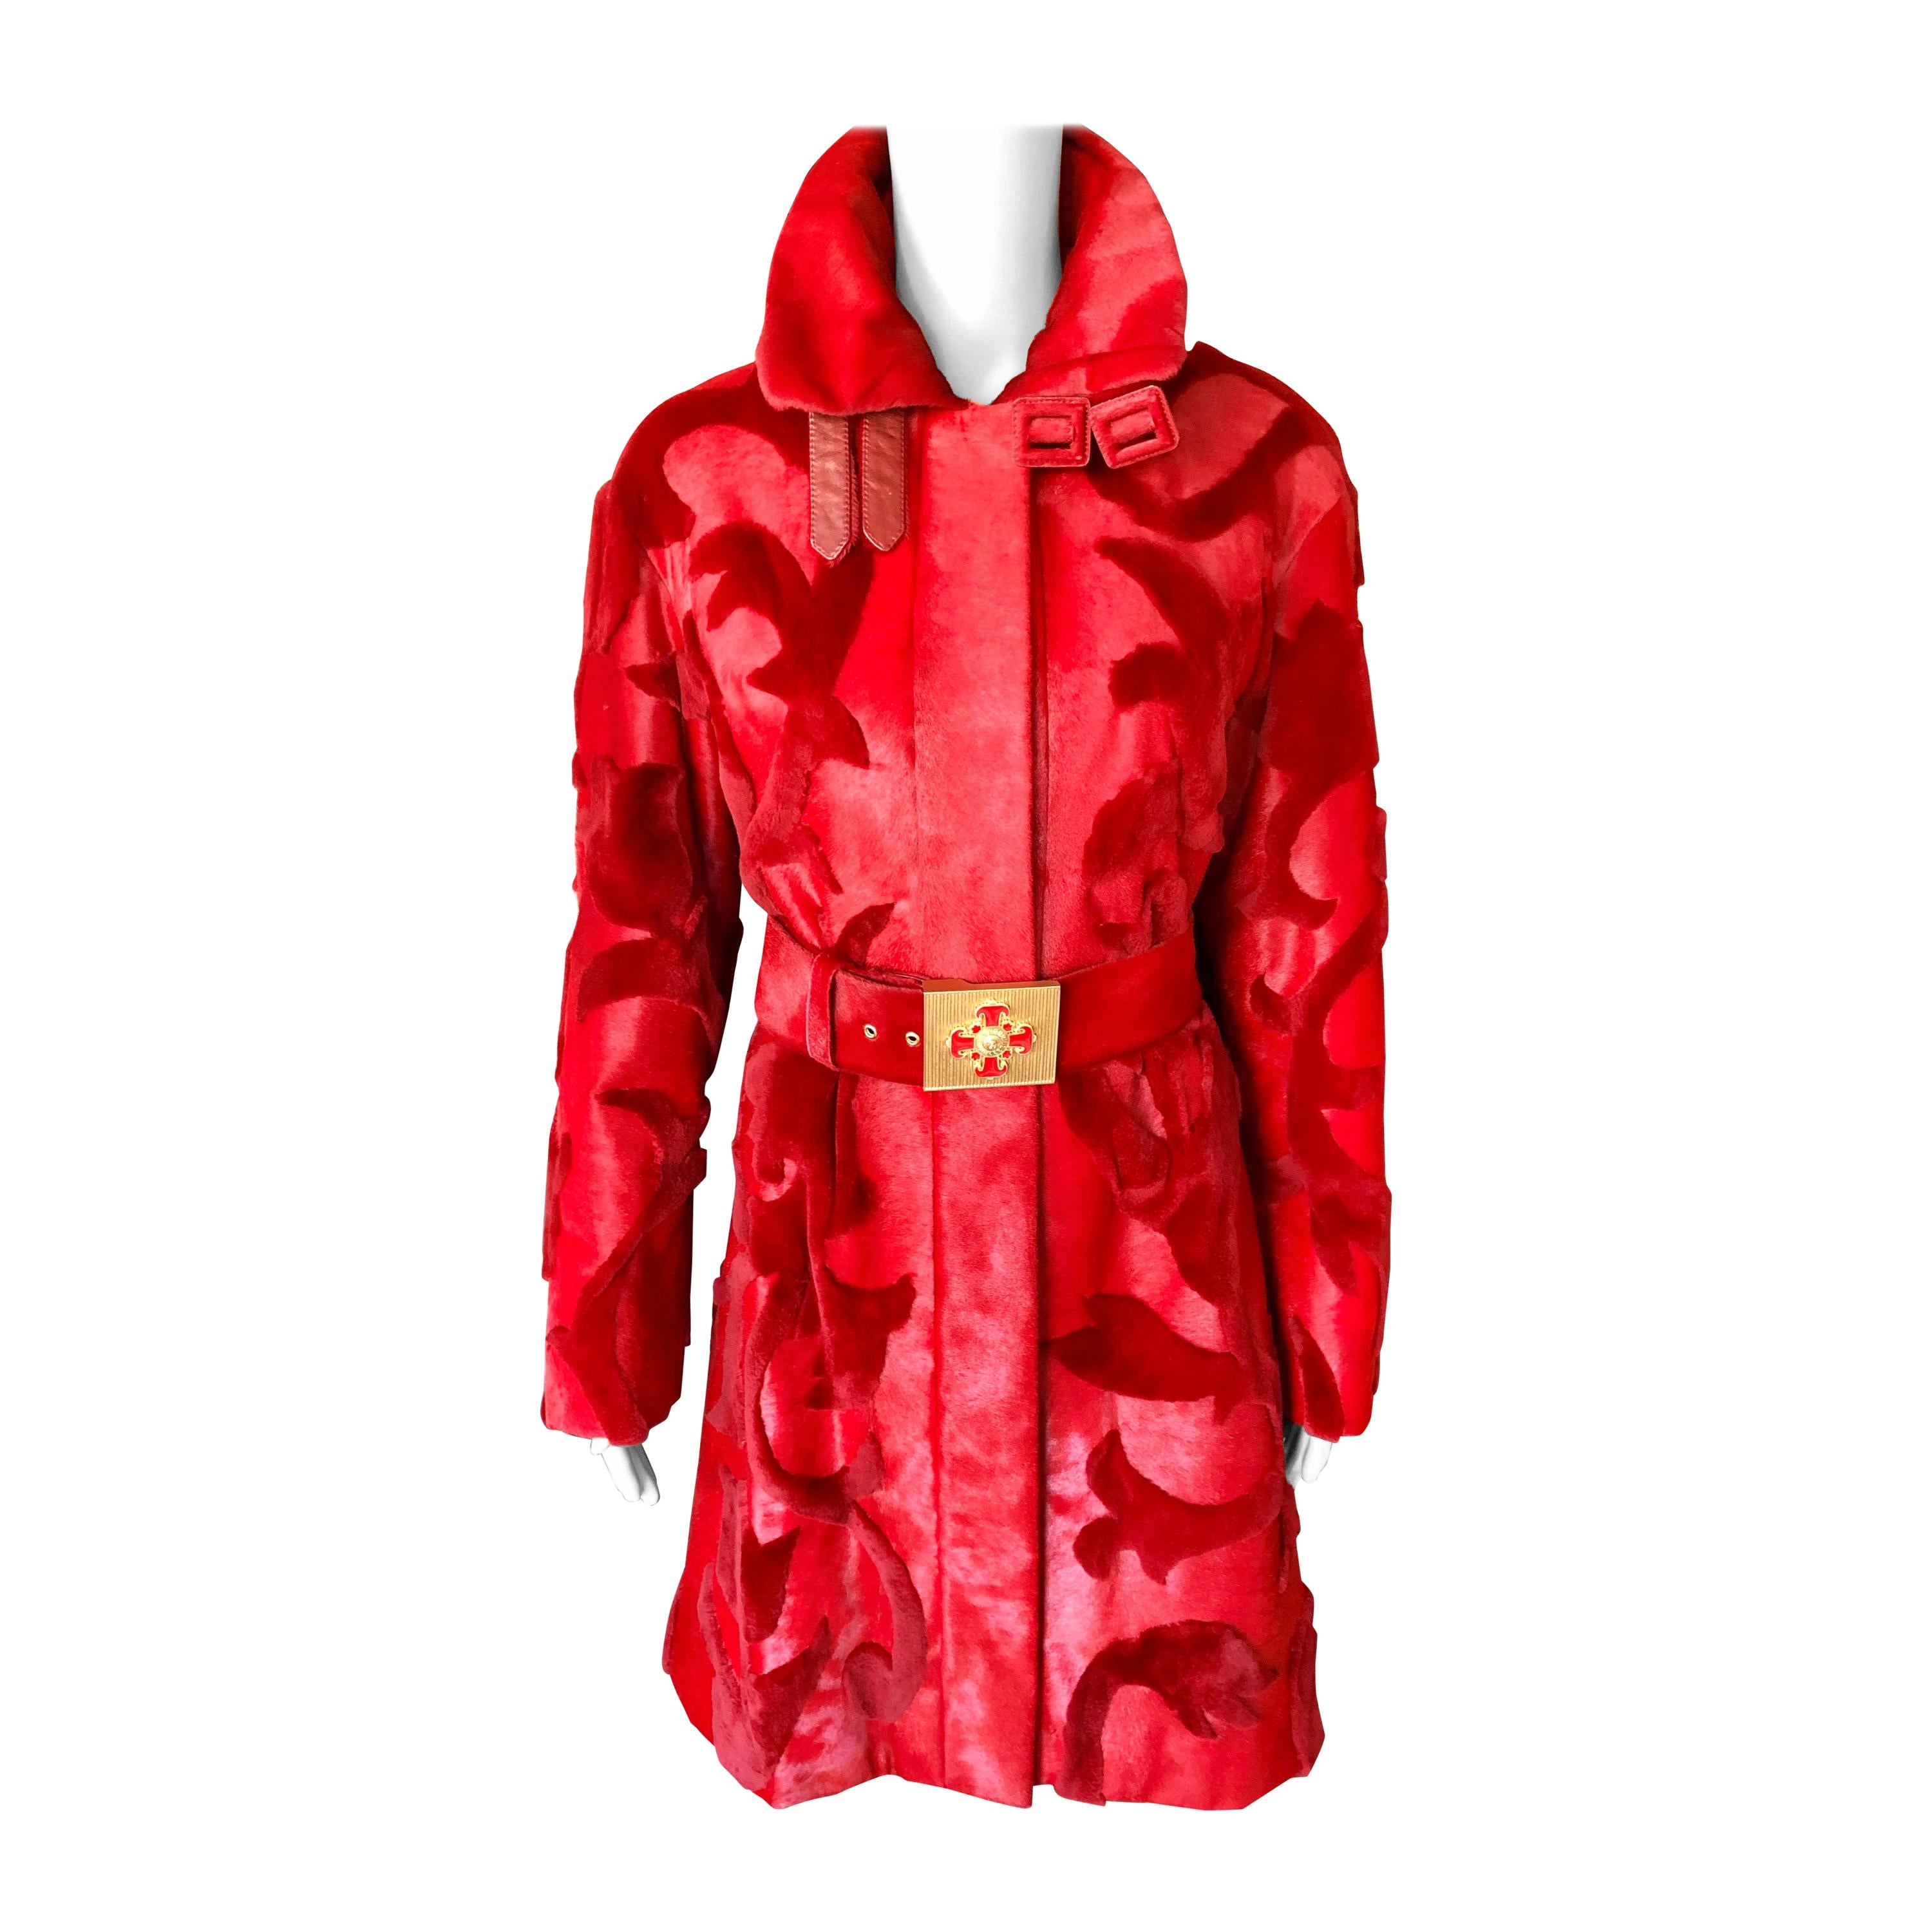 Versace F/W 2011 Runway Mink Fur and Leather Belted Knee-Length Red Jacket Coat For Sale